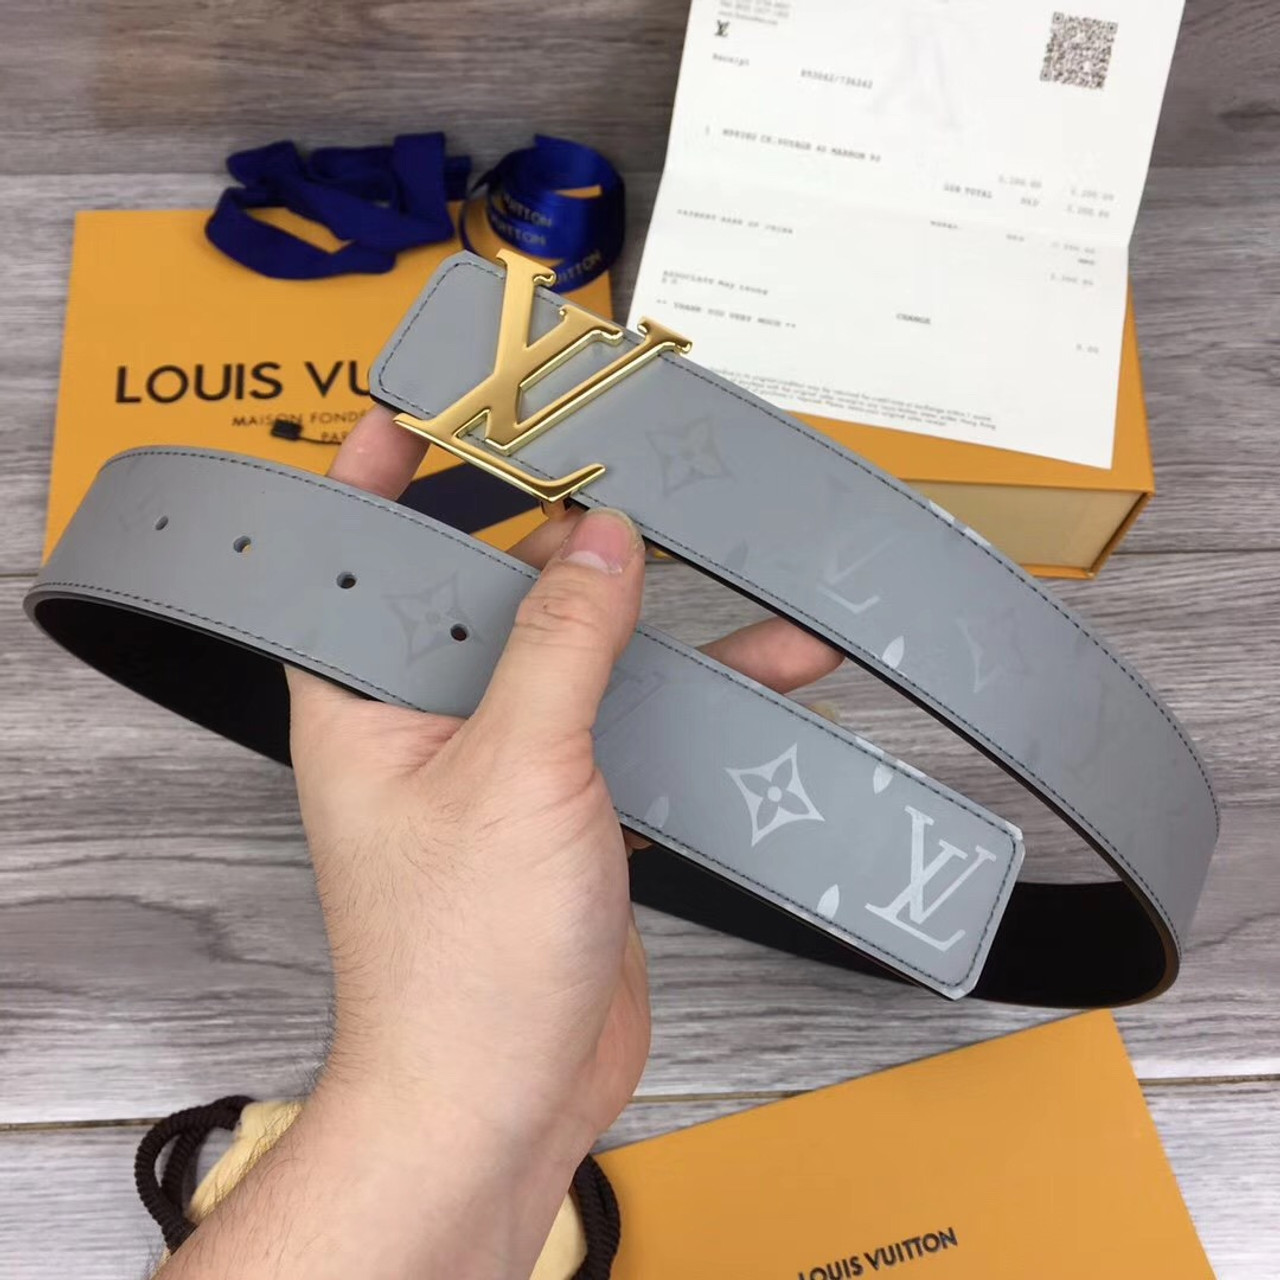 Gurgle kupon Farvel where to buy the best stockX High quality replica UA Louis Vuitton Monogram  belt 2019 virgil abloh (pick color) Hypedripz is the best high quality  trusted clone replica fake designer hypebeast seller